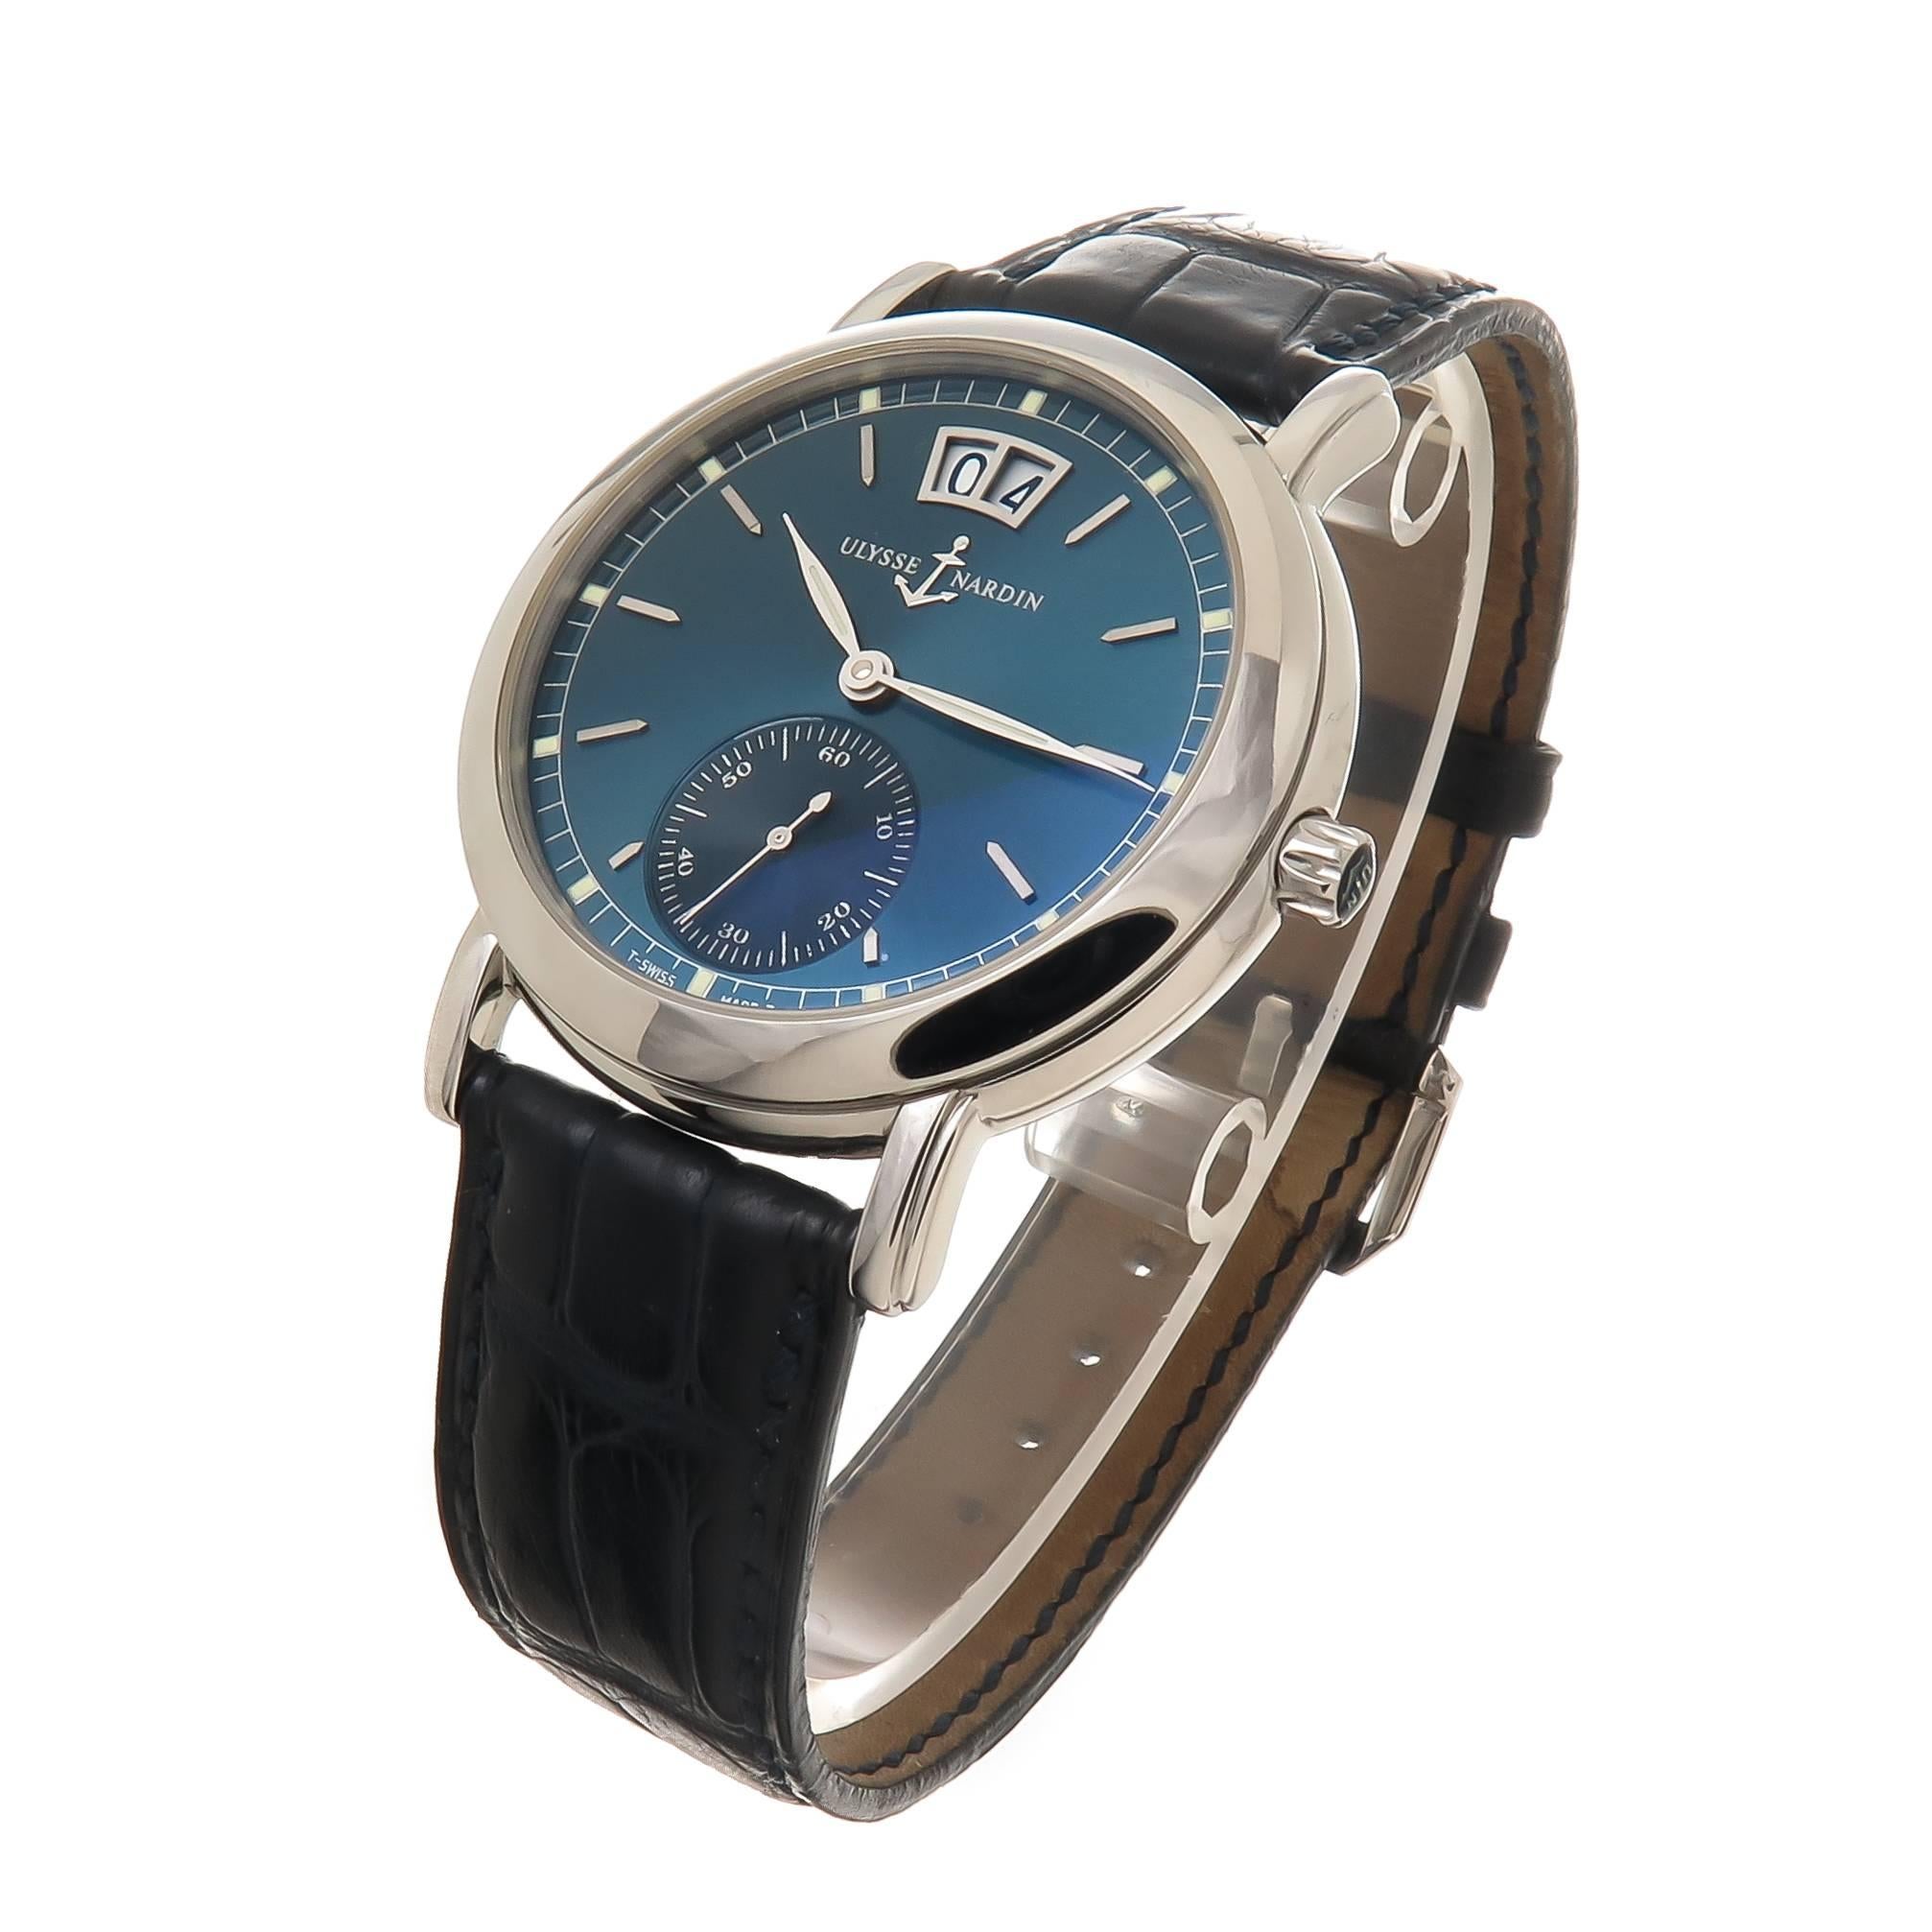 Circa 2010 Ulysse Nardin Reference 343-22 San Marco Big Date, 37 MM Stainless Steel Water Resistant Case.Automatic self winding Movement. Metallic Blue Dial with Raised Markers, sub seconds chapter and Calendar window. Dark Blue Ulysse Nardin